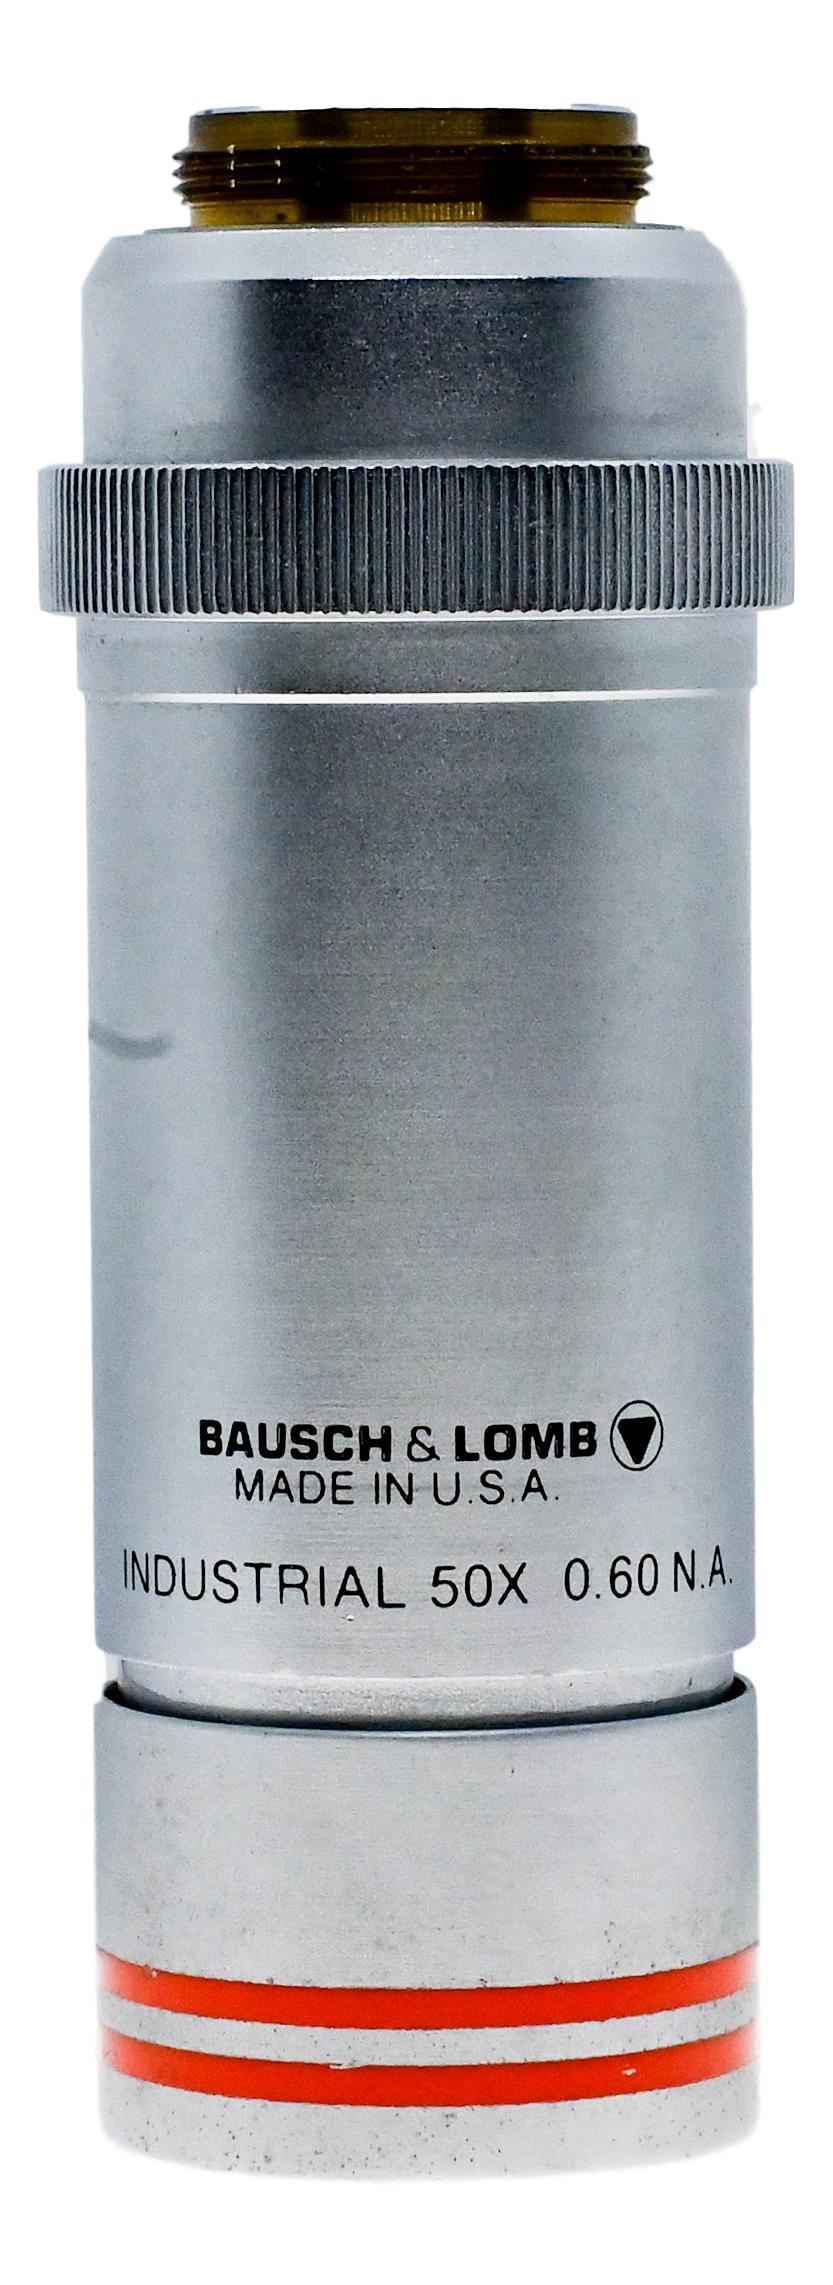 Bausch & Lomb Industrial 50x Objective